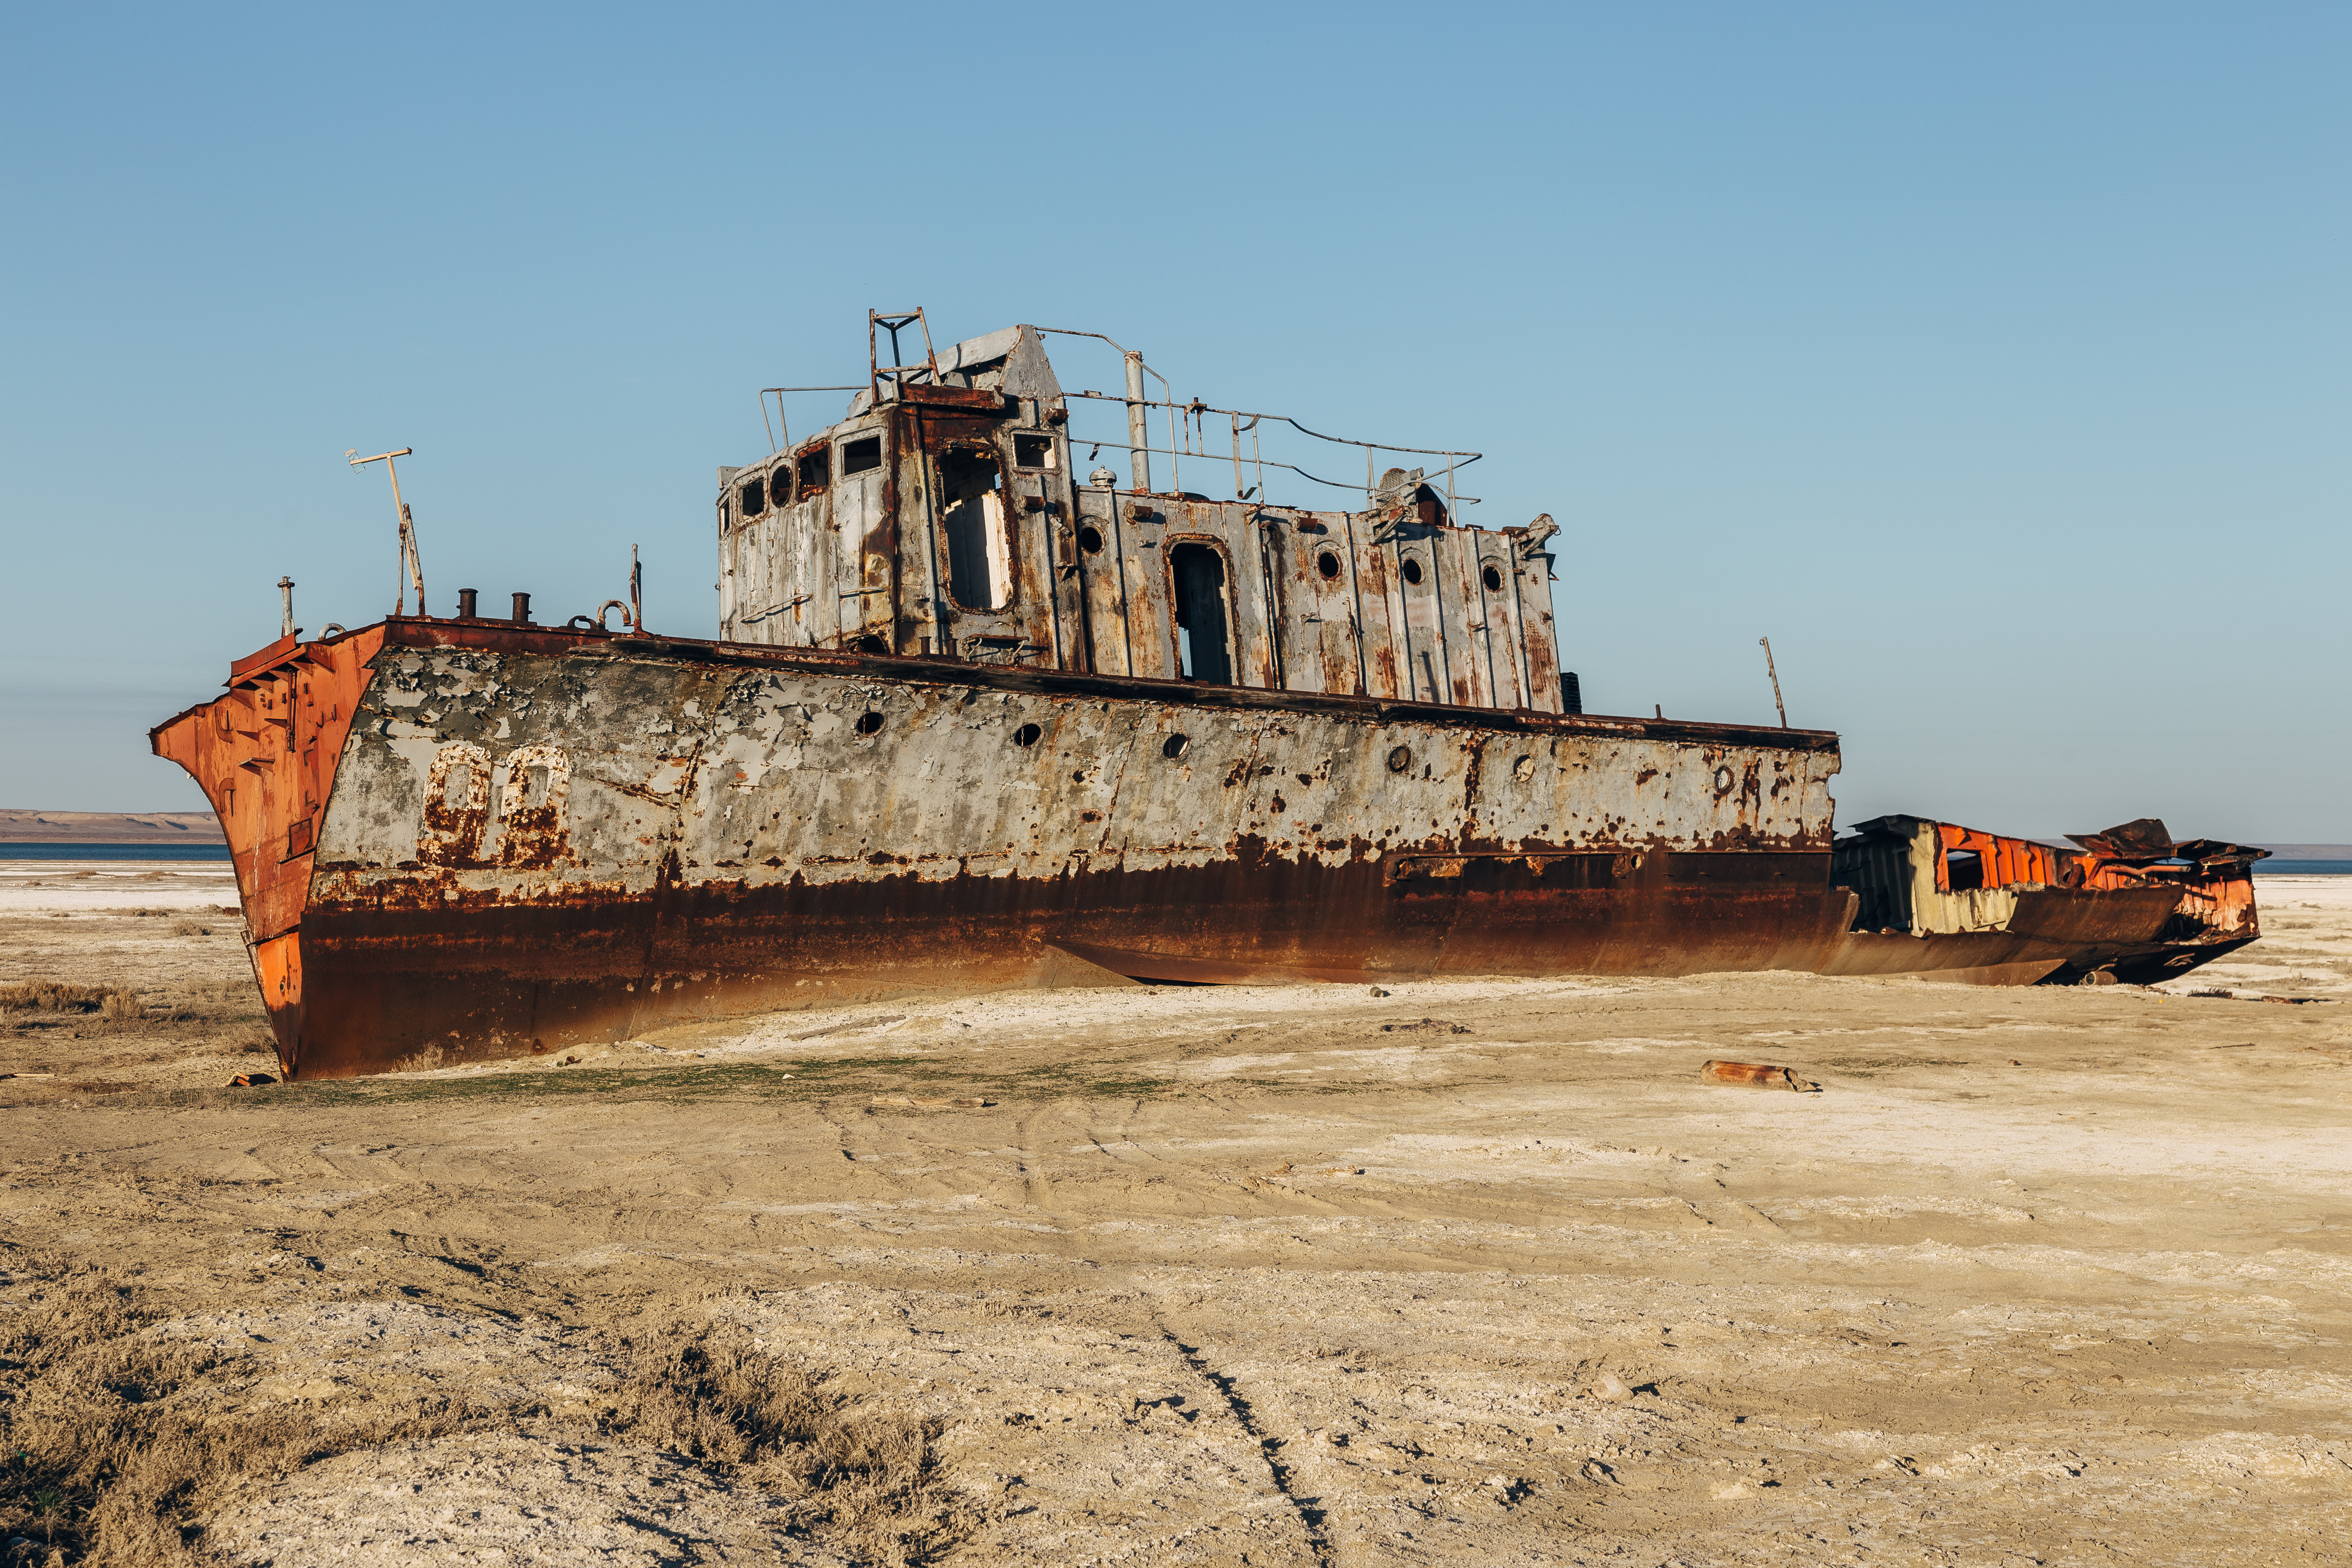 Can the Aral Sea ever recover? And is the Caspian Sea climate change’s next victim?